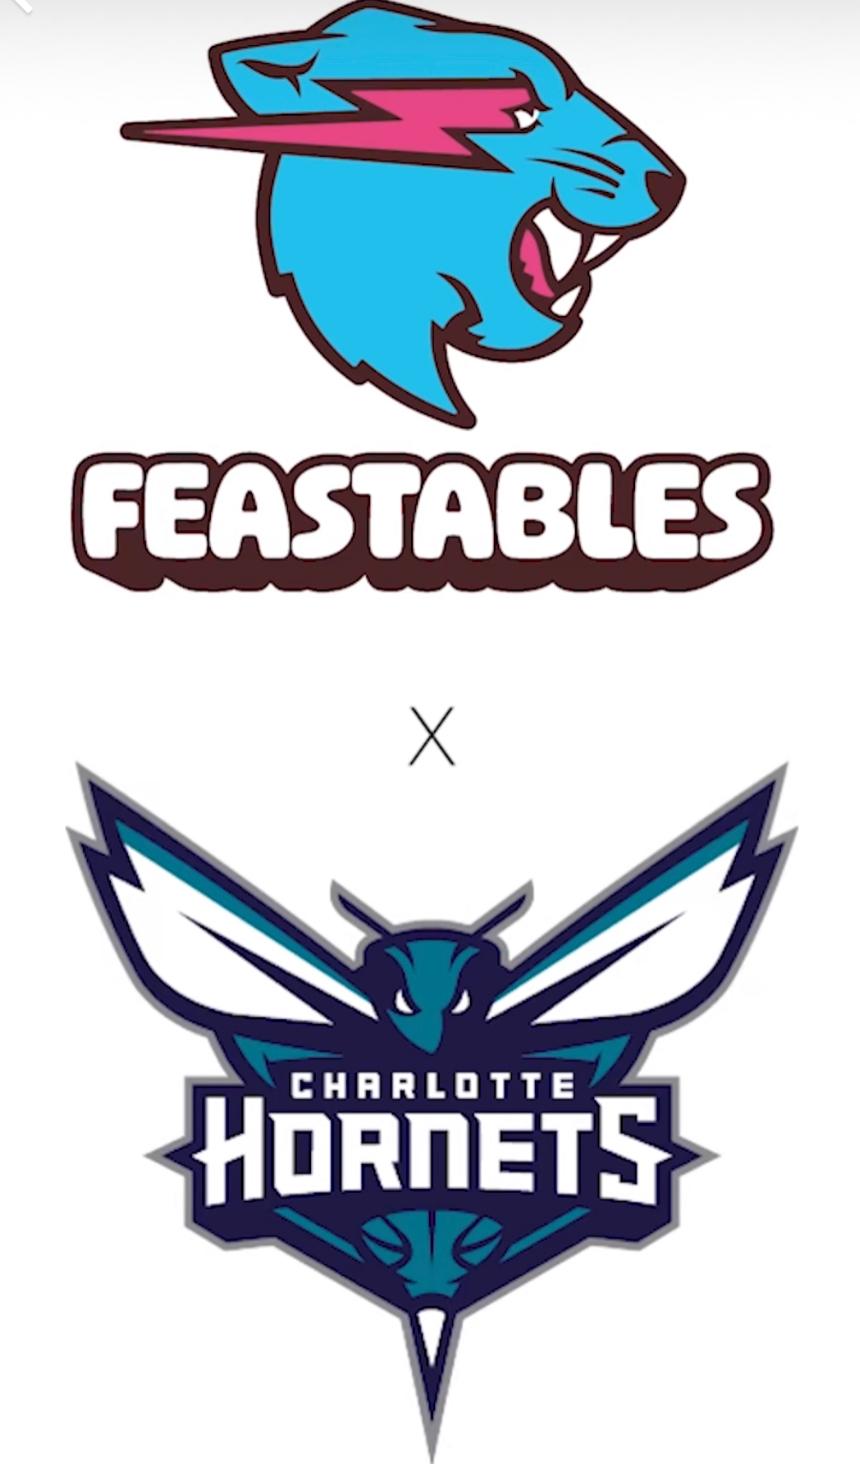 Feastables have partnered with the Charlotte Hornets